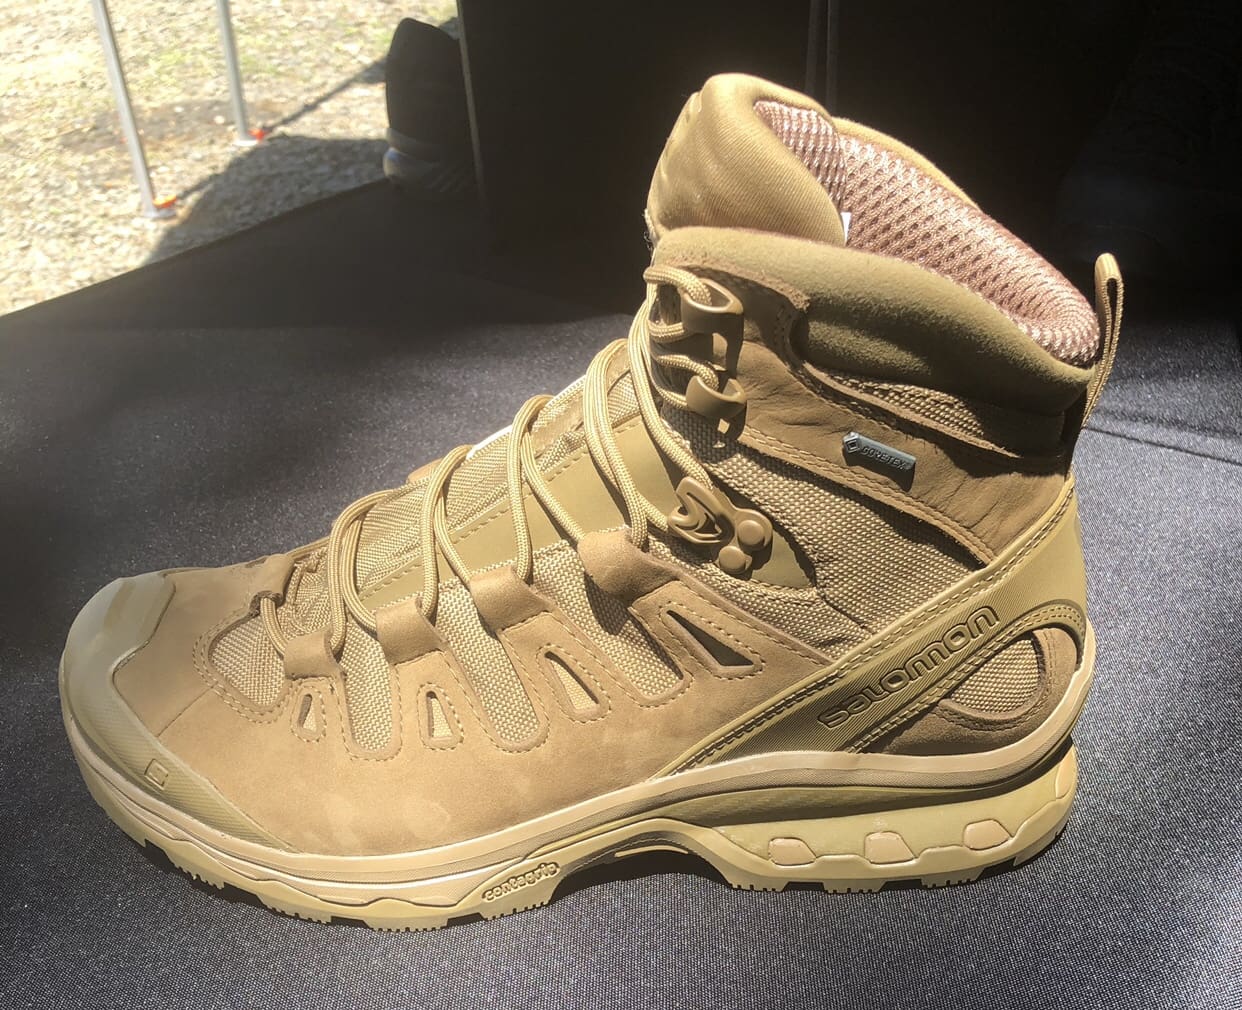 Salomon Forces - Compliant Quest Boots Now Available - Soldier Systems Daily